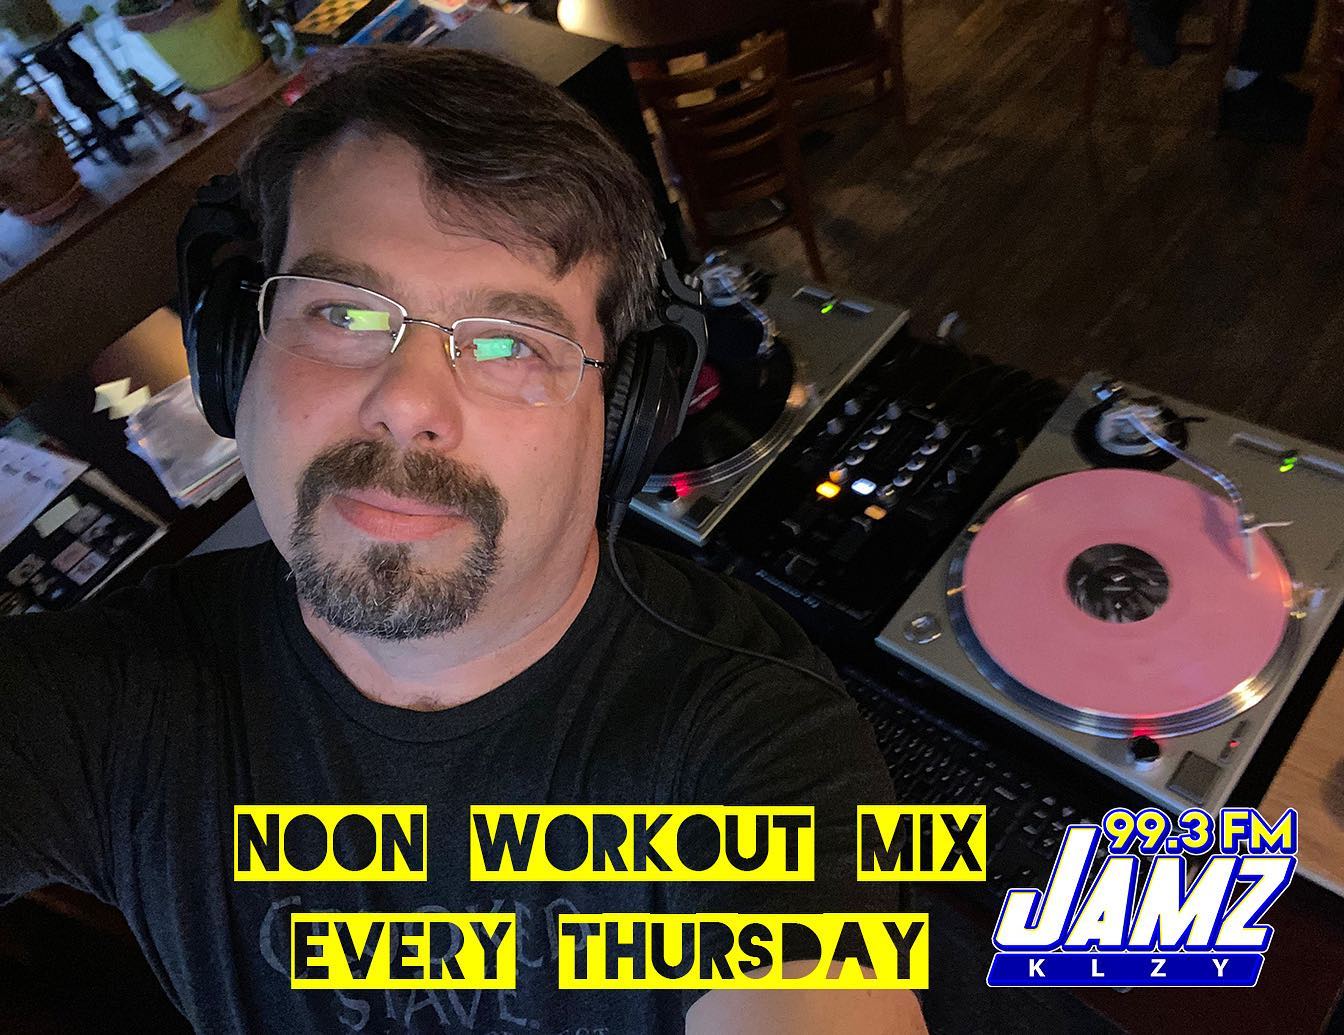 Today’s Midday Melodic Mix is nothing but full-length all-natural 100% pure Trance anthems! Noon (central) at jamz993fm.com #salinakansas #6740wonderful #trancemusic #centralkansas